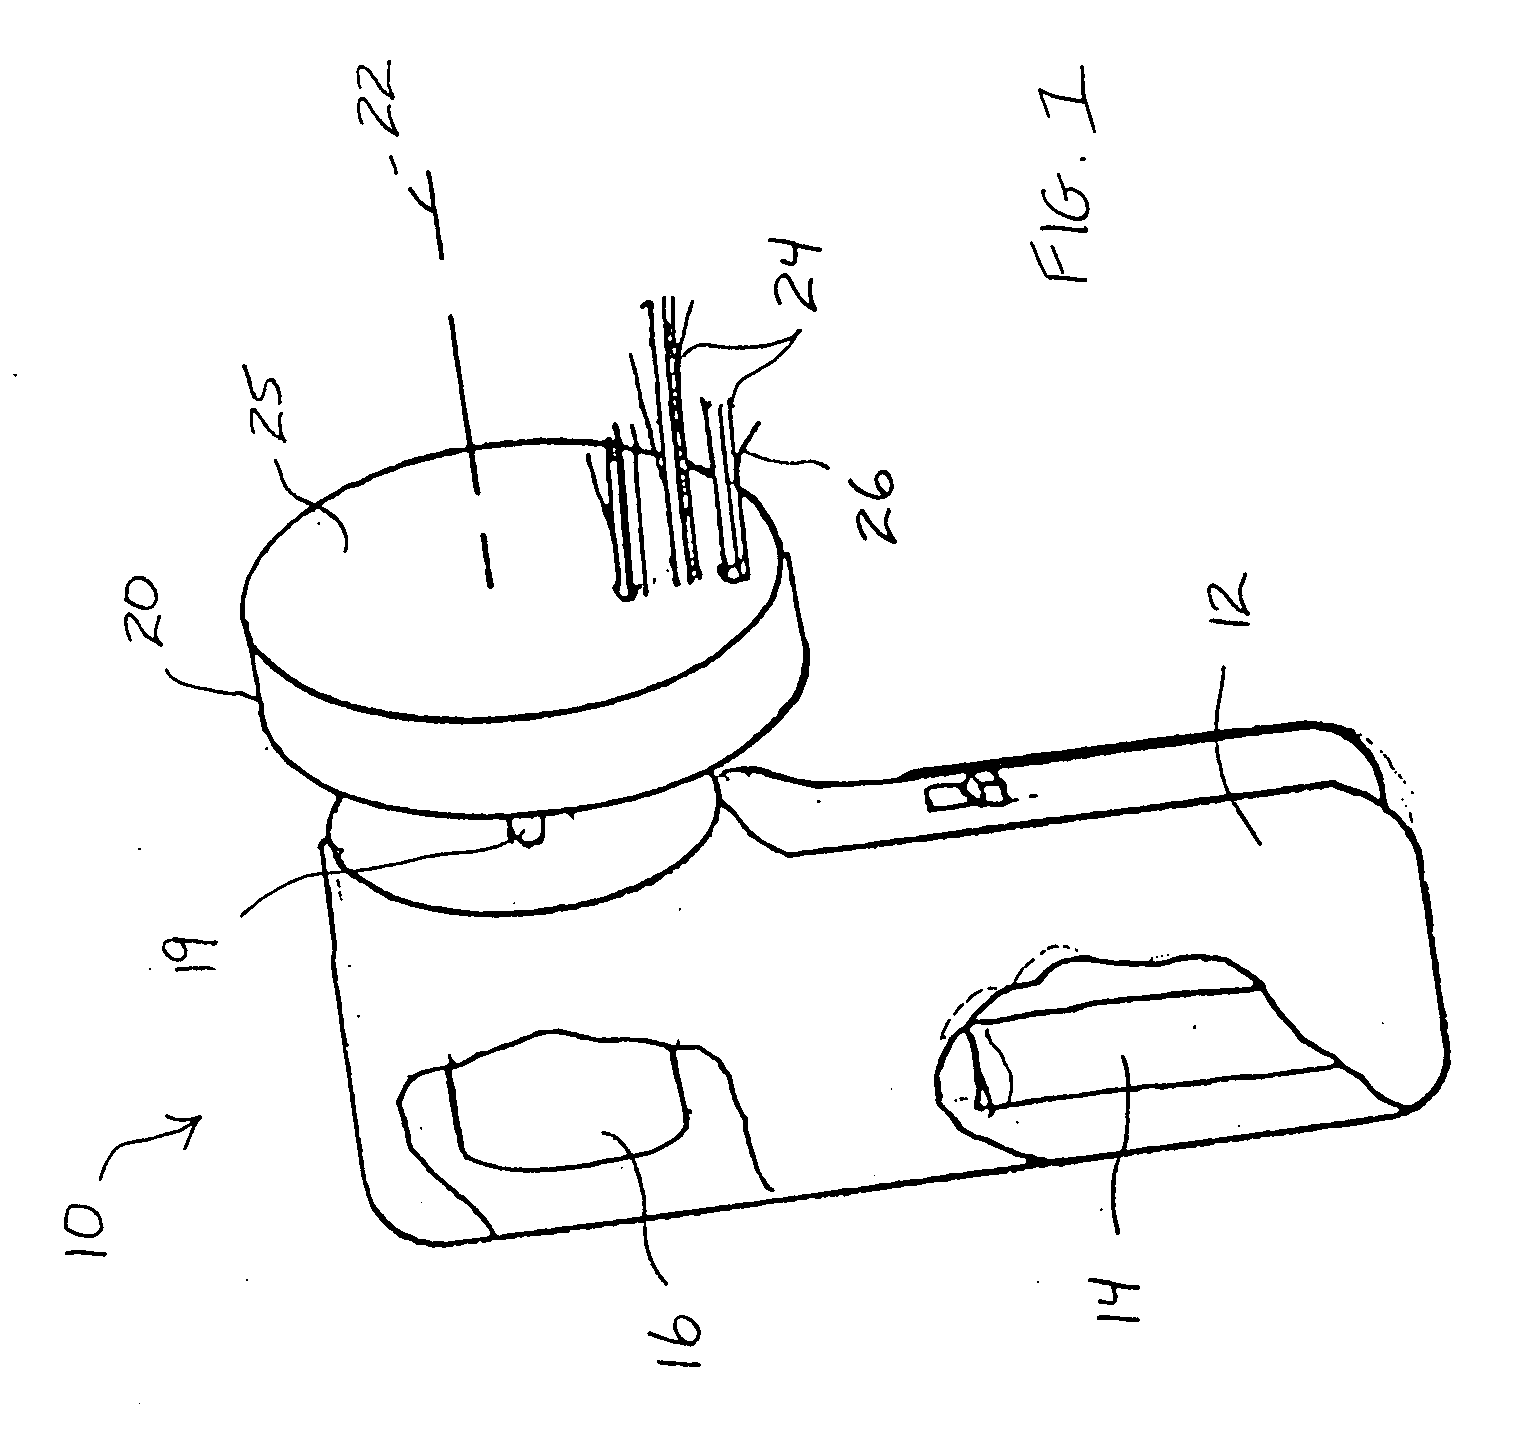 Spinning fiber optic novelty device and its associated method of manufacture